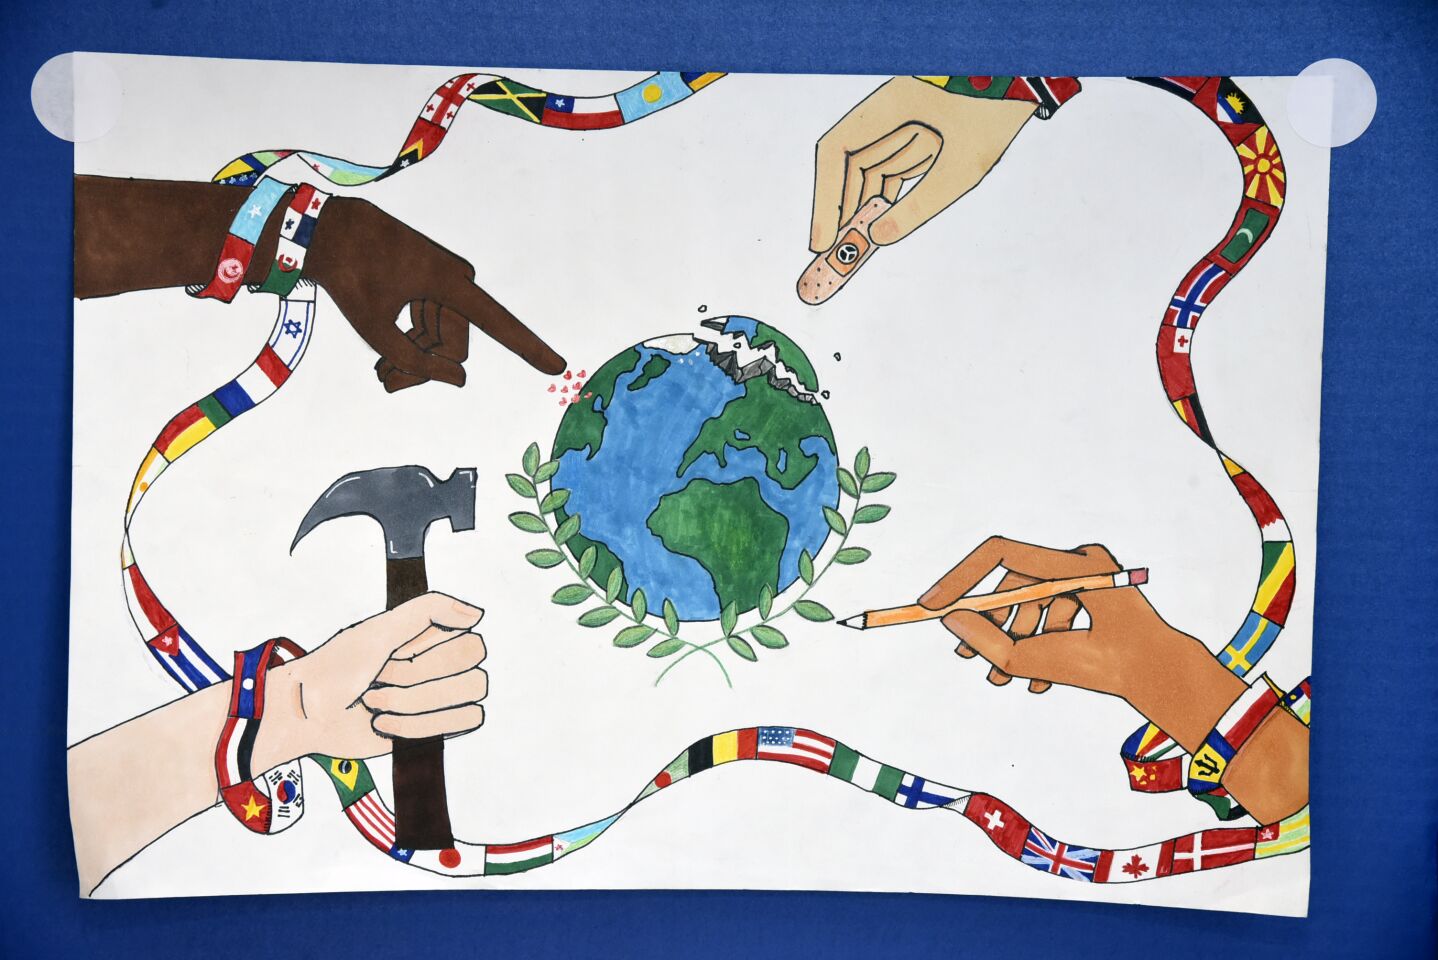 The Encinitas Lions Peace Poster winning entry by Sasha Tien